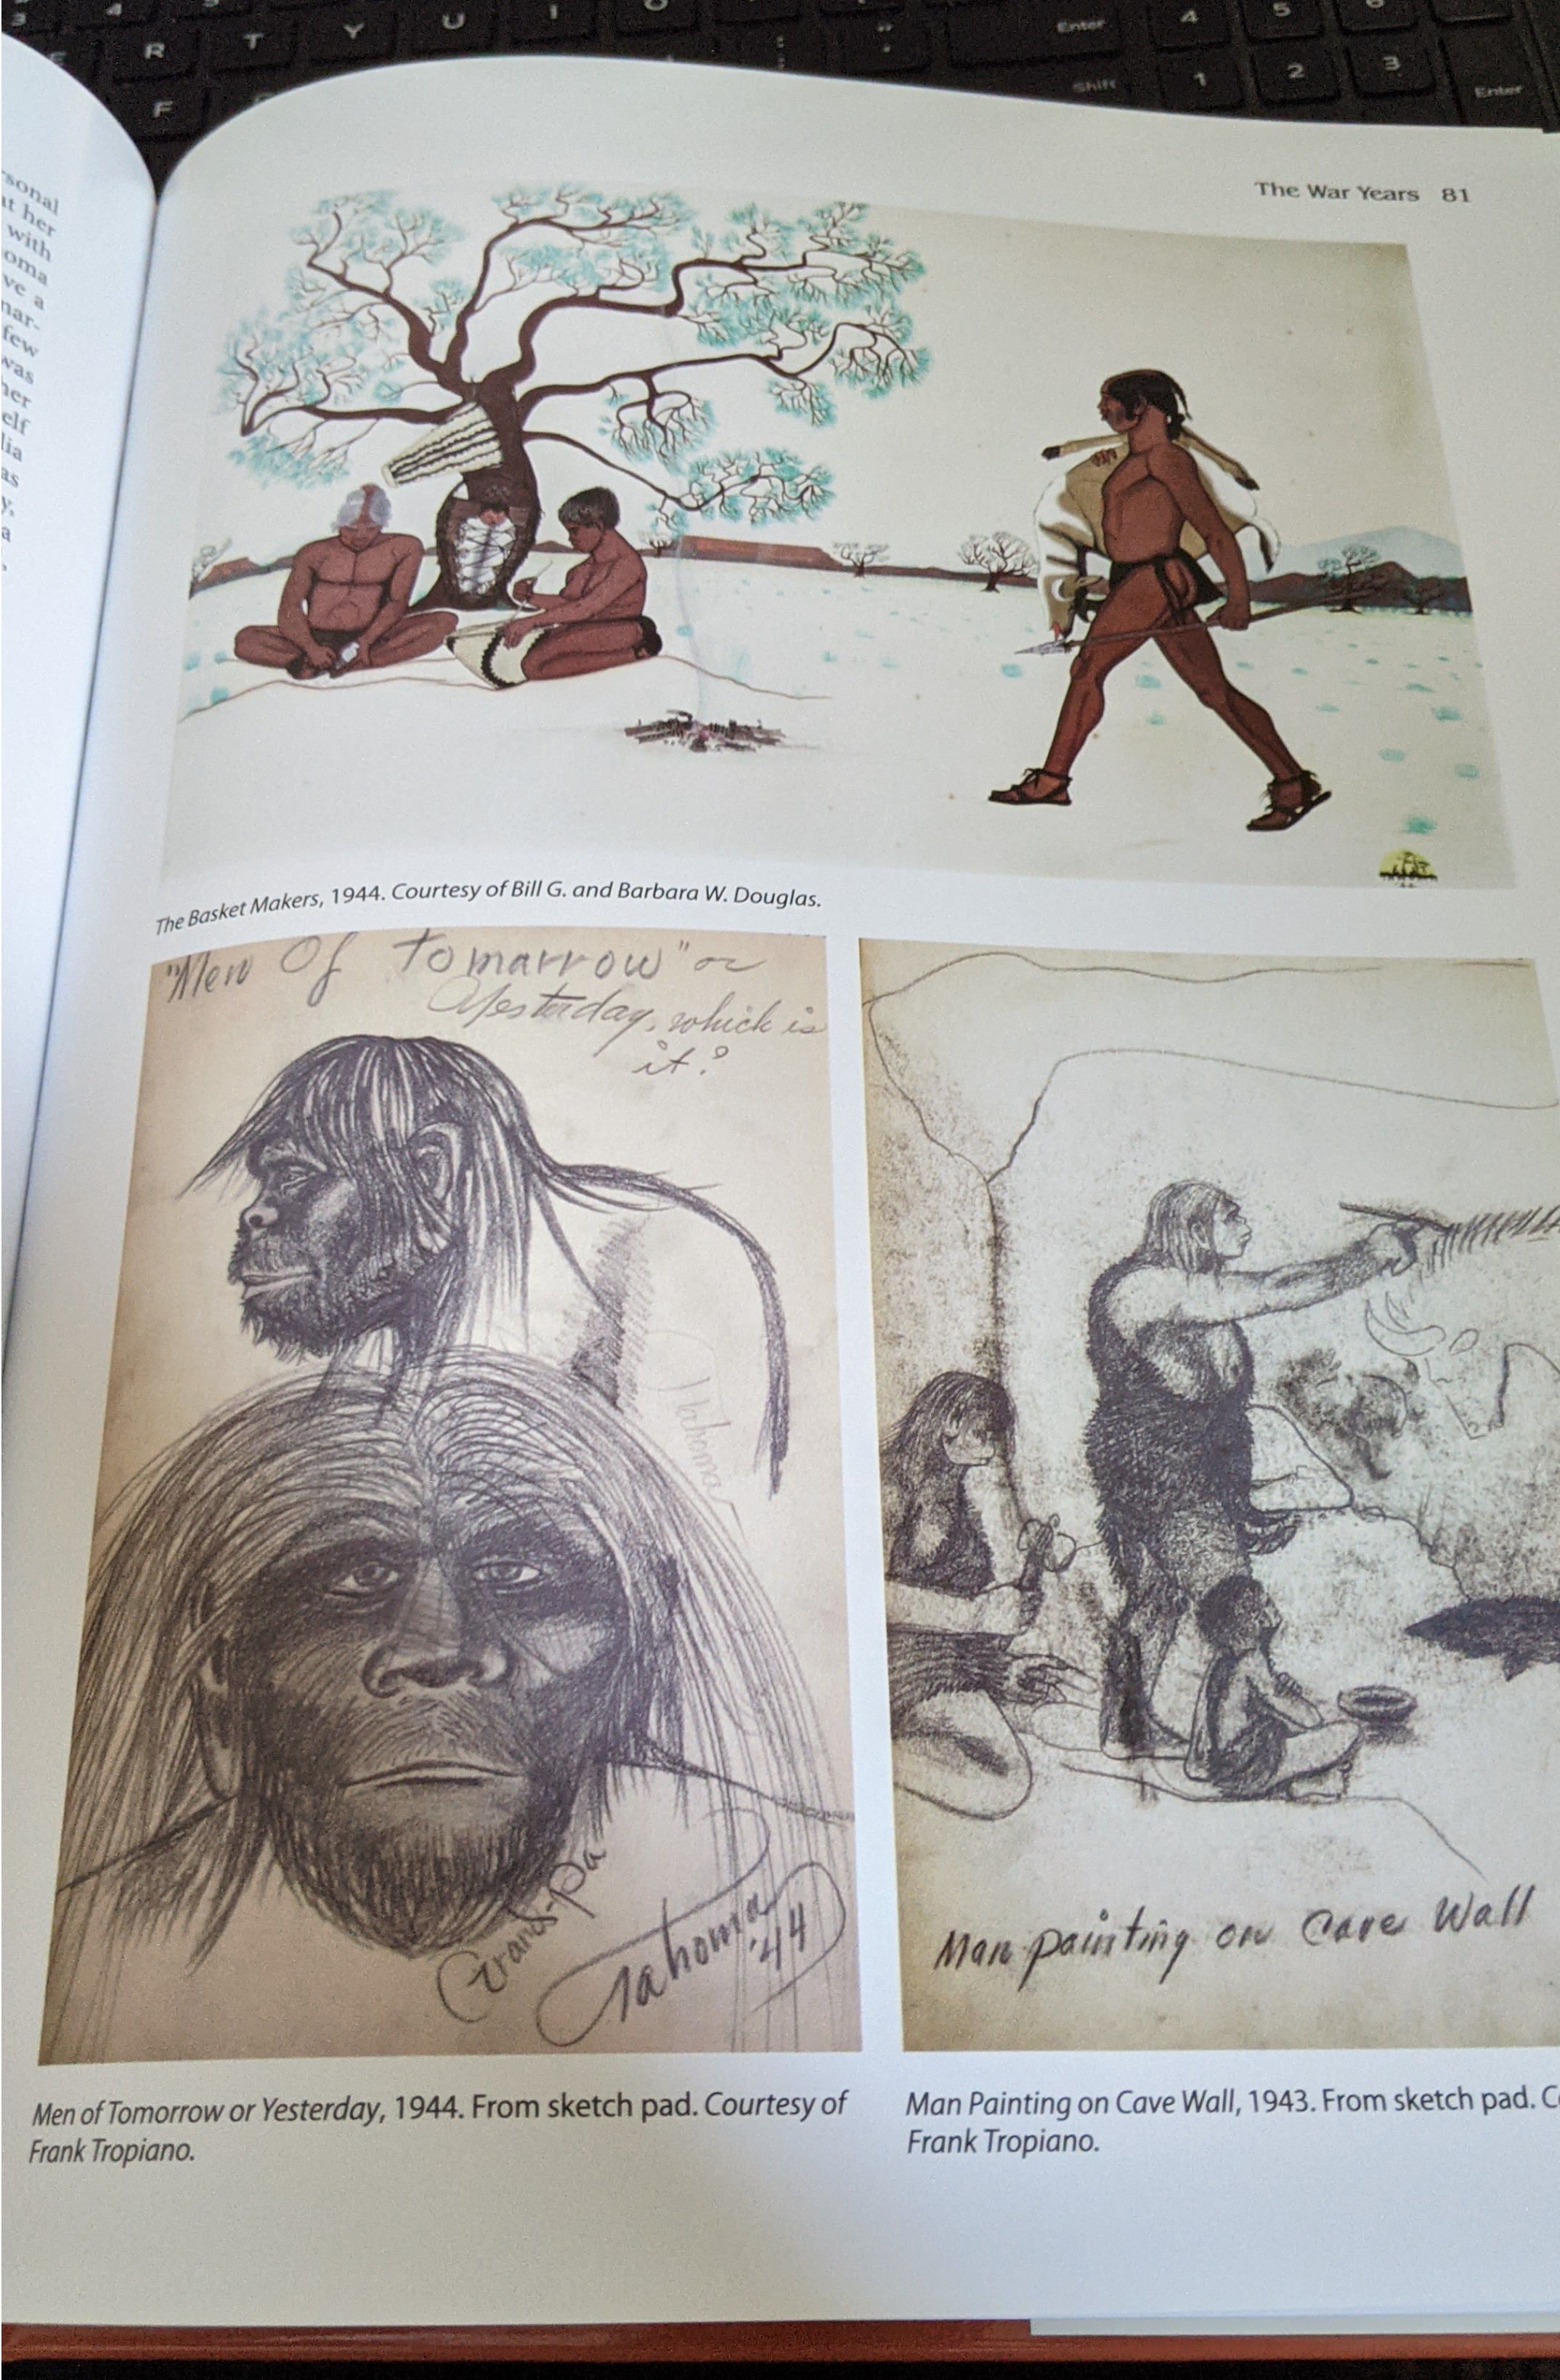 A page from the biography of Quincy Tahoma that shows some of his illustrations.